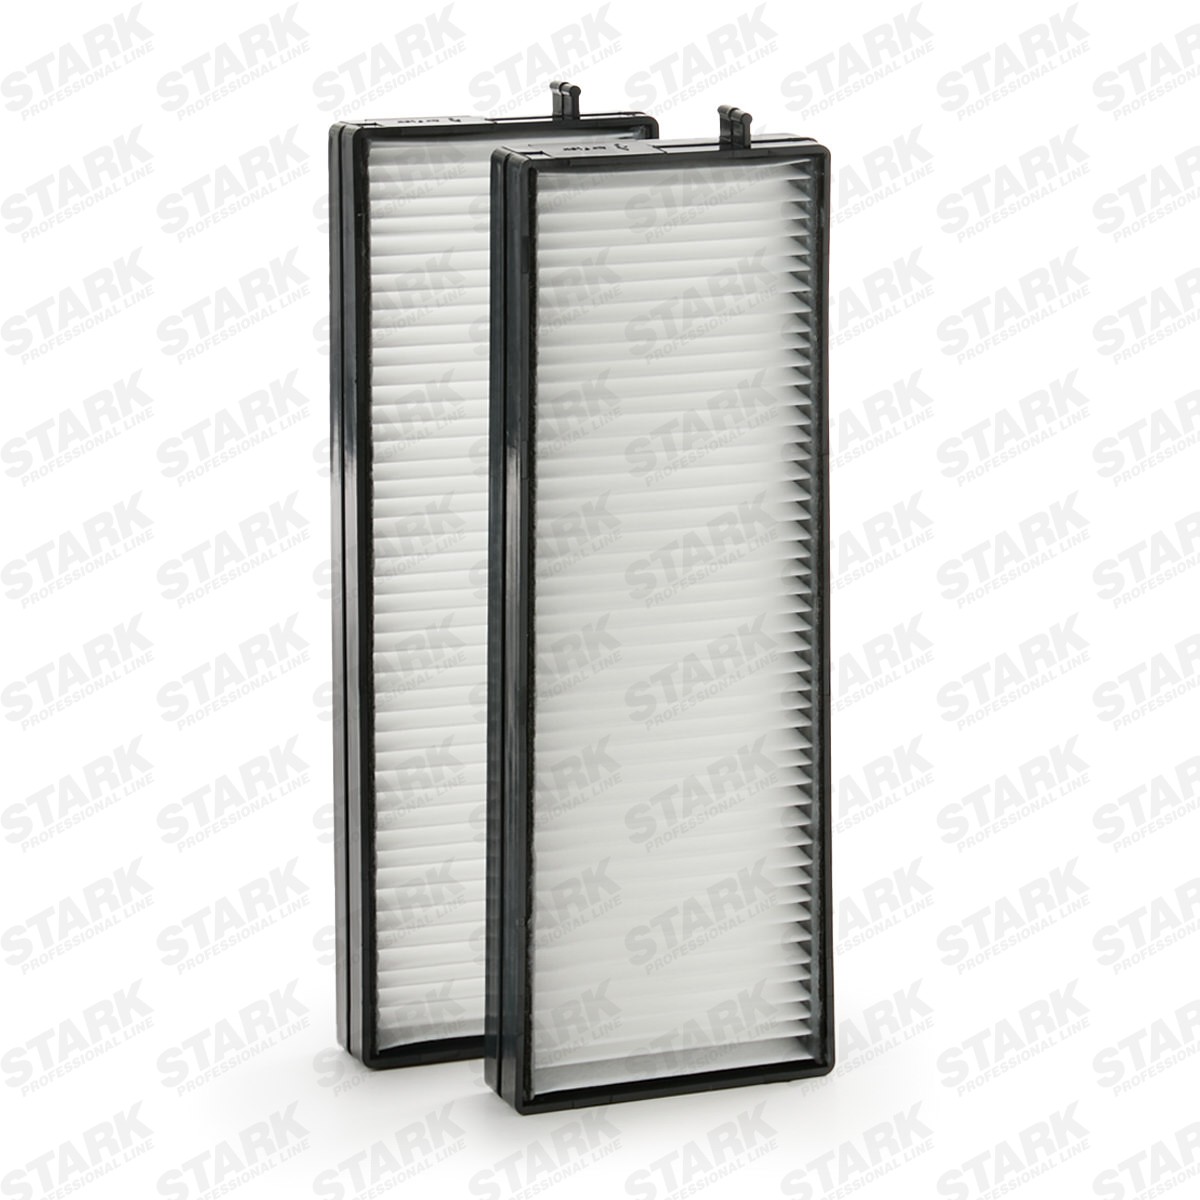 STARK SKIF-0170184 Air conditioner filter Particulate Filter, 260 mm x 86 mm x 20 mm